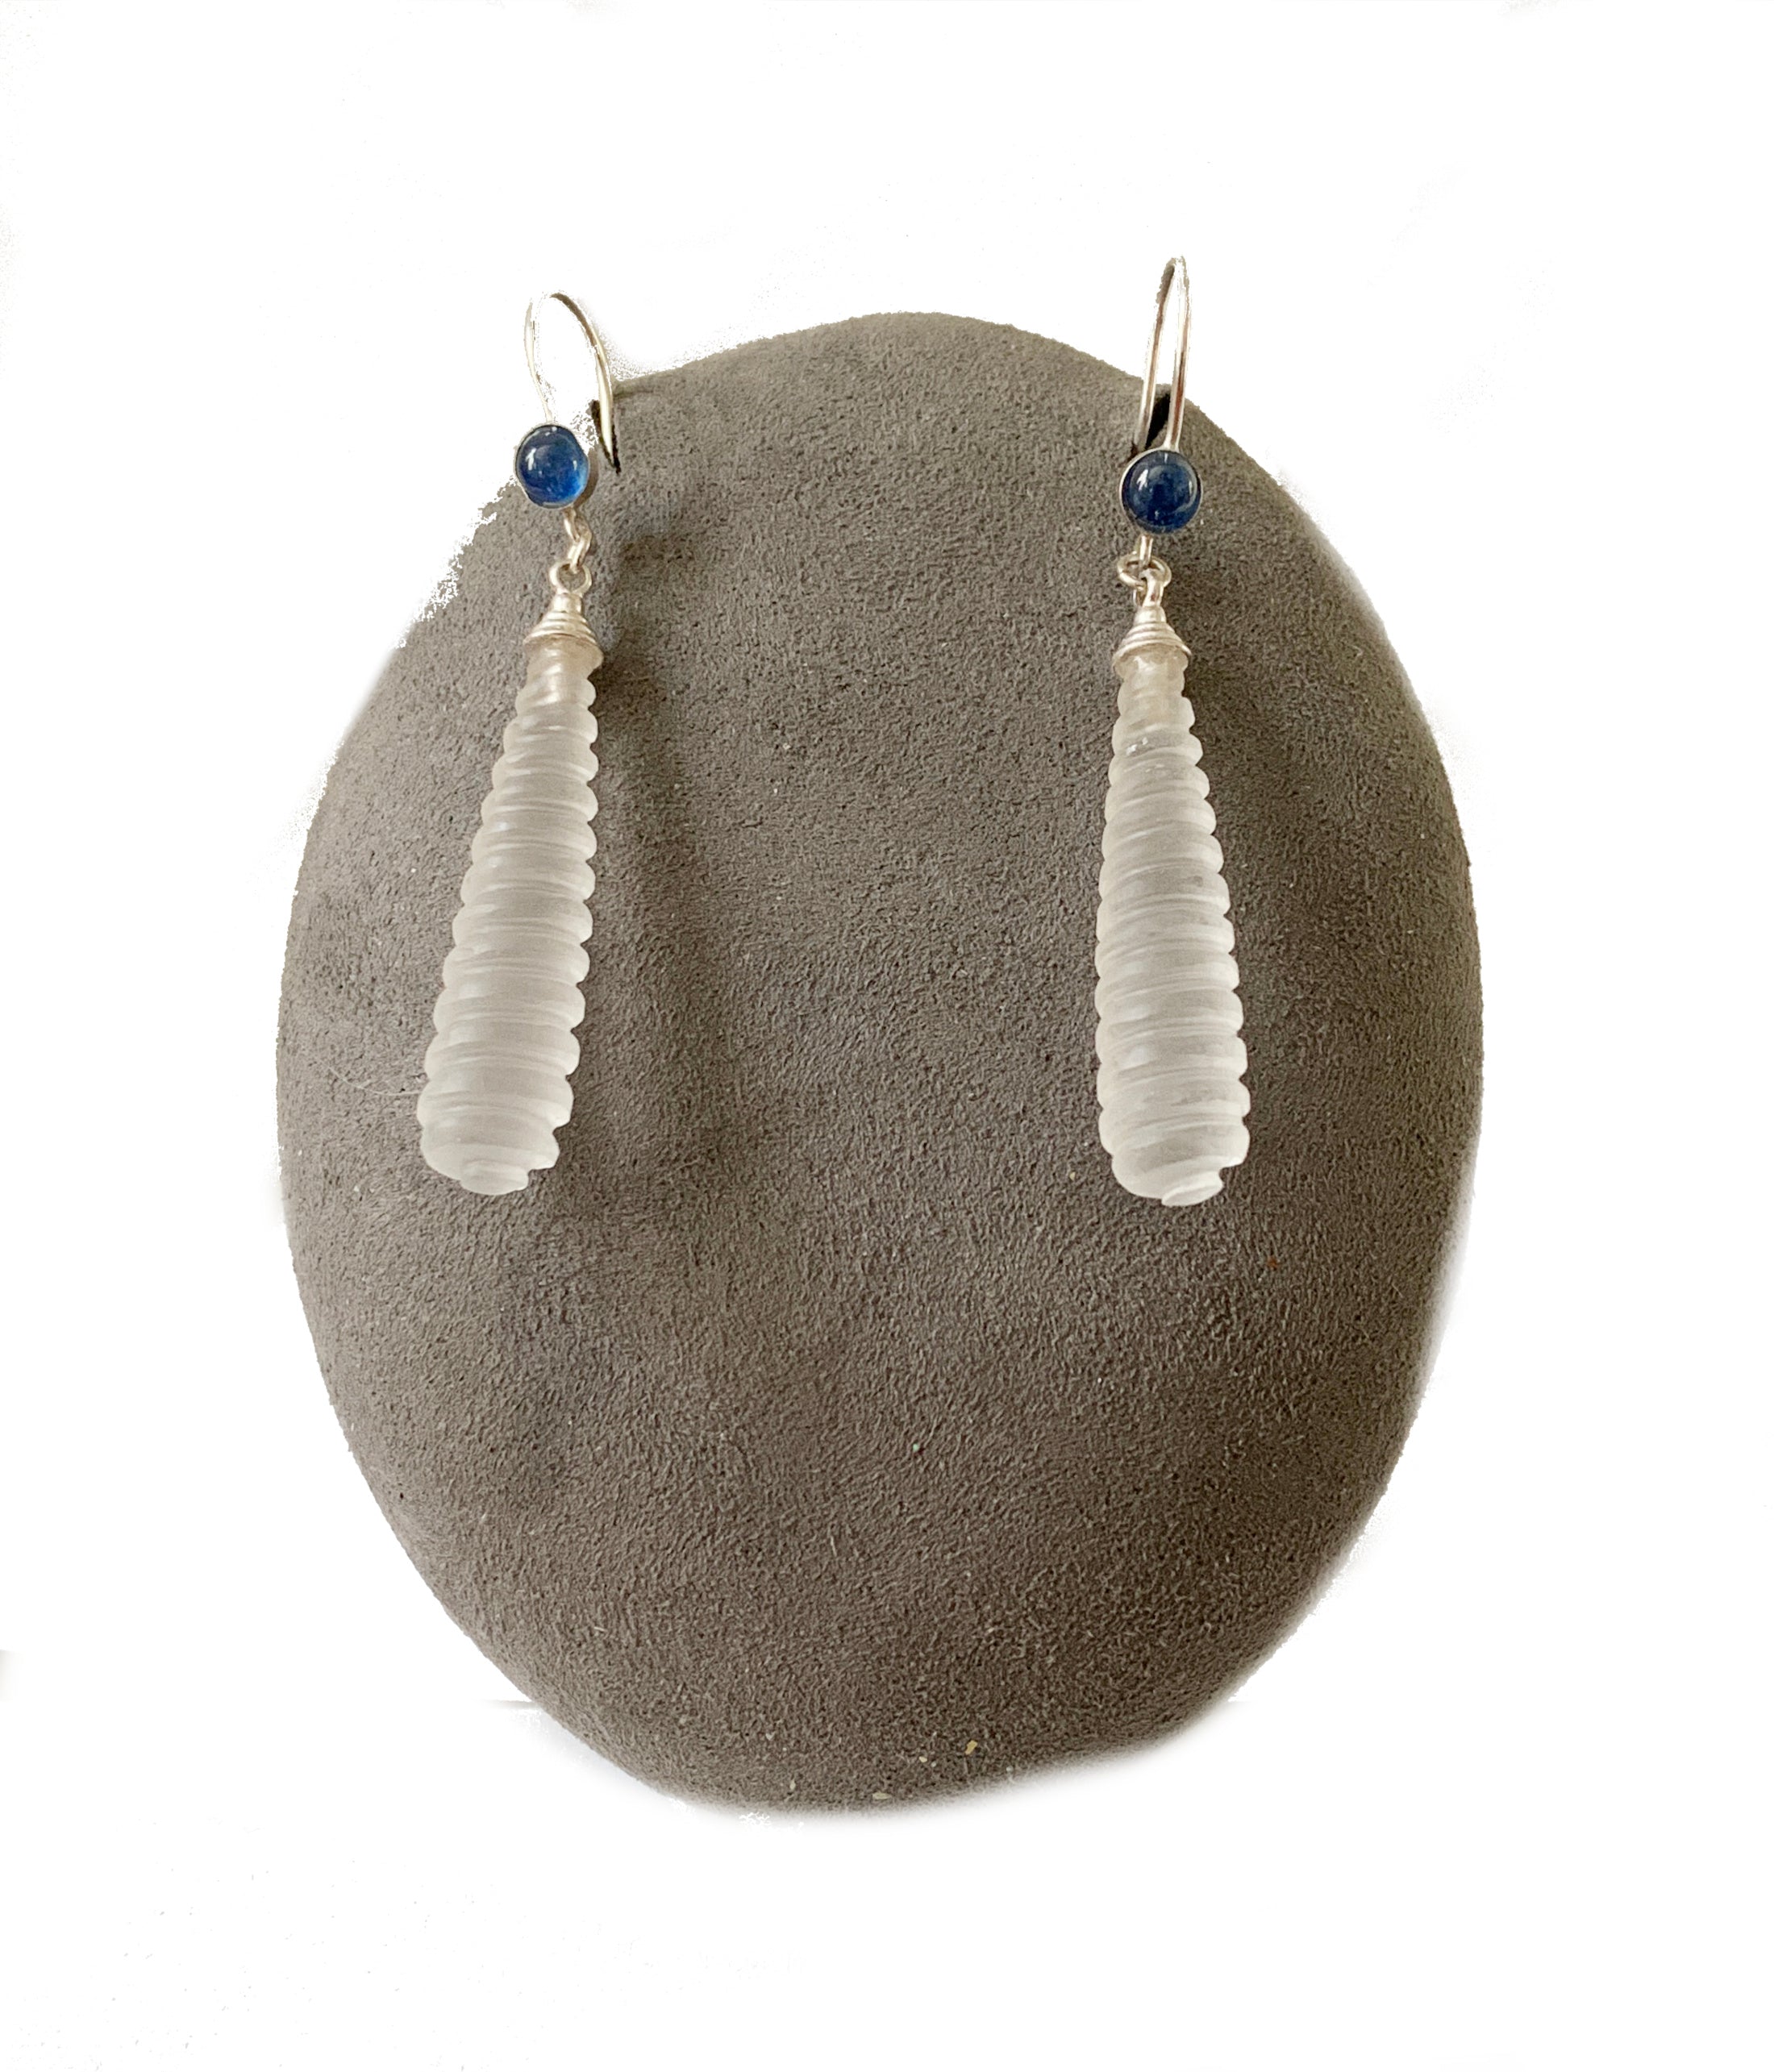 Carved Frosted Quartz Drop Earrings with Sapphire in Sterling Silver